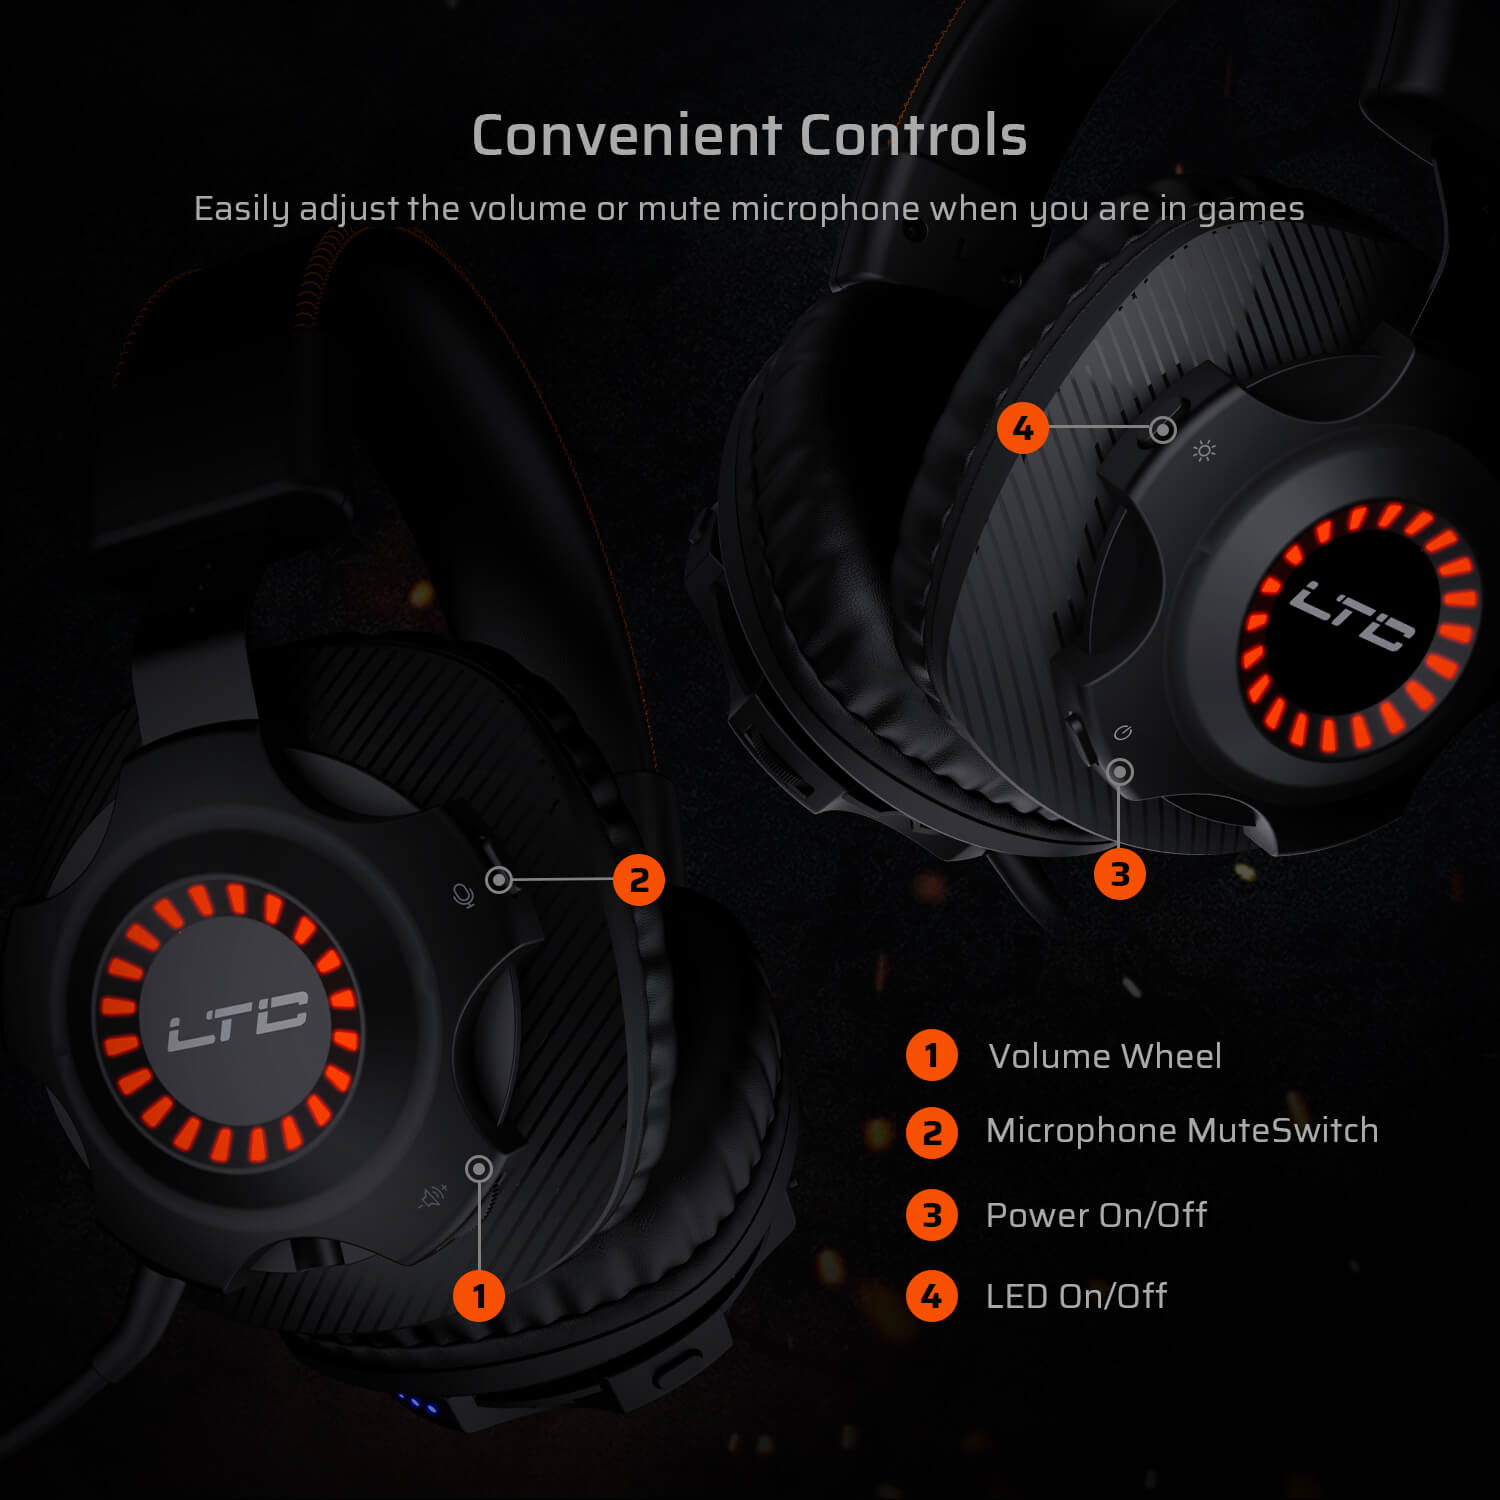 LTC SoundSlave 2.4G Wireless/Wired Gaming Headset,